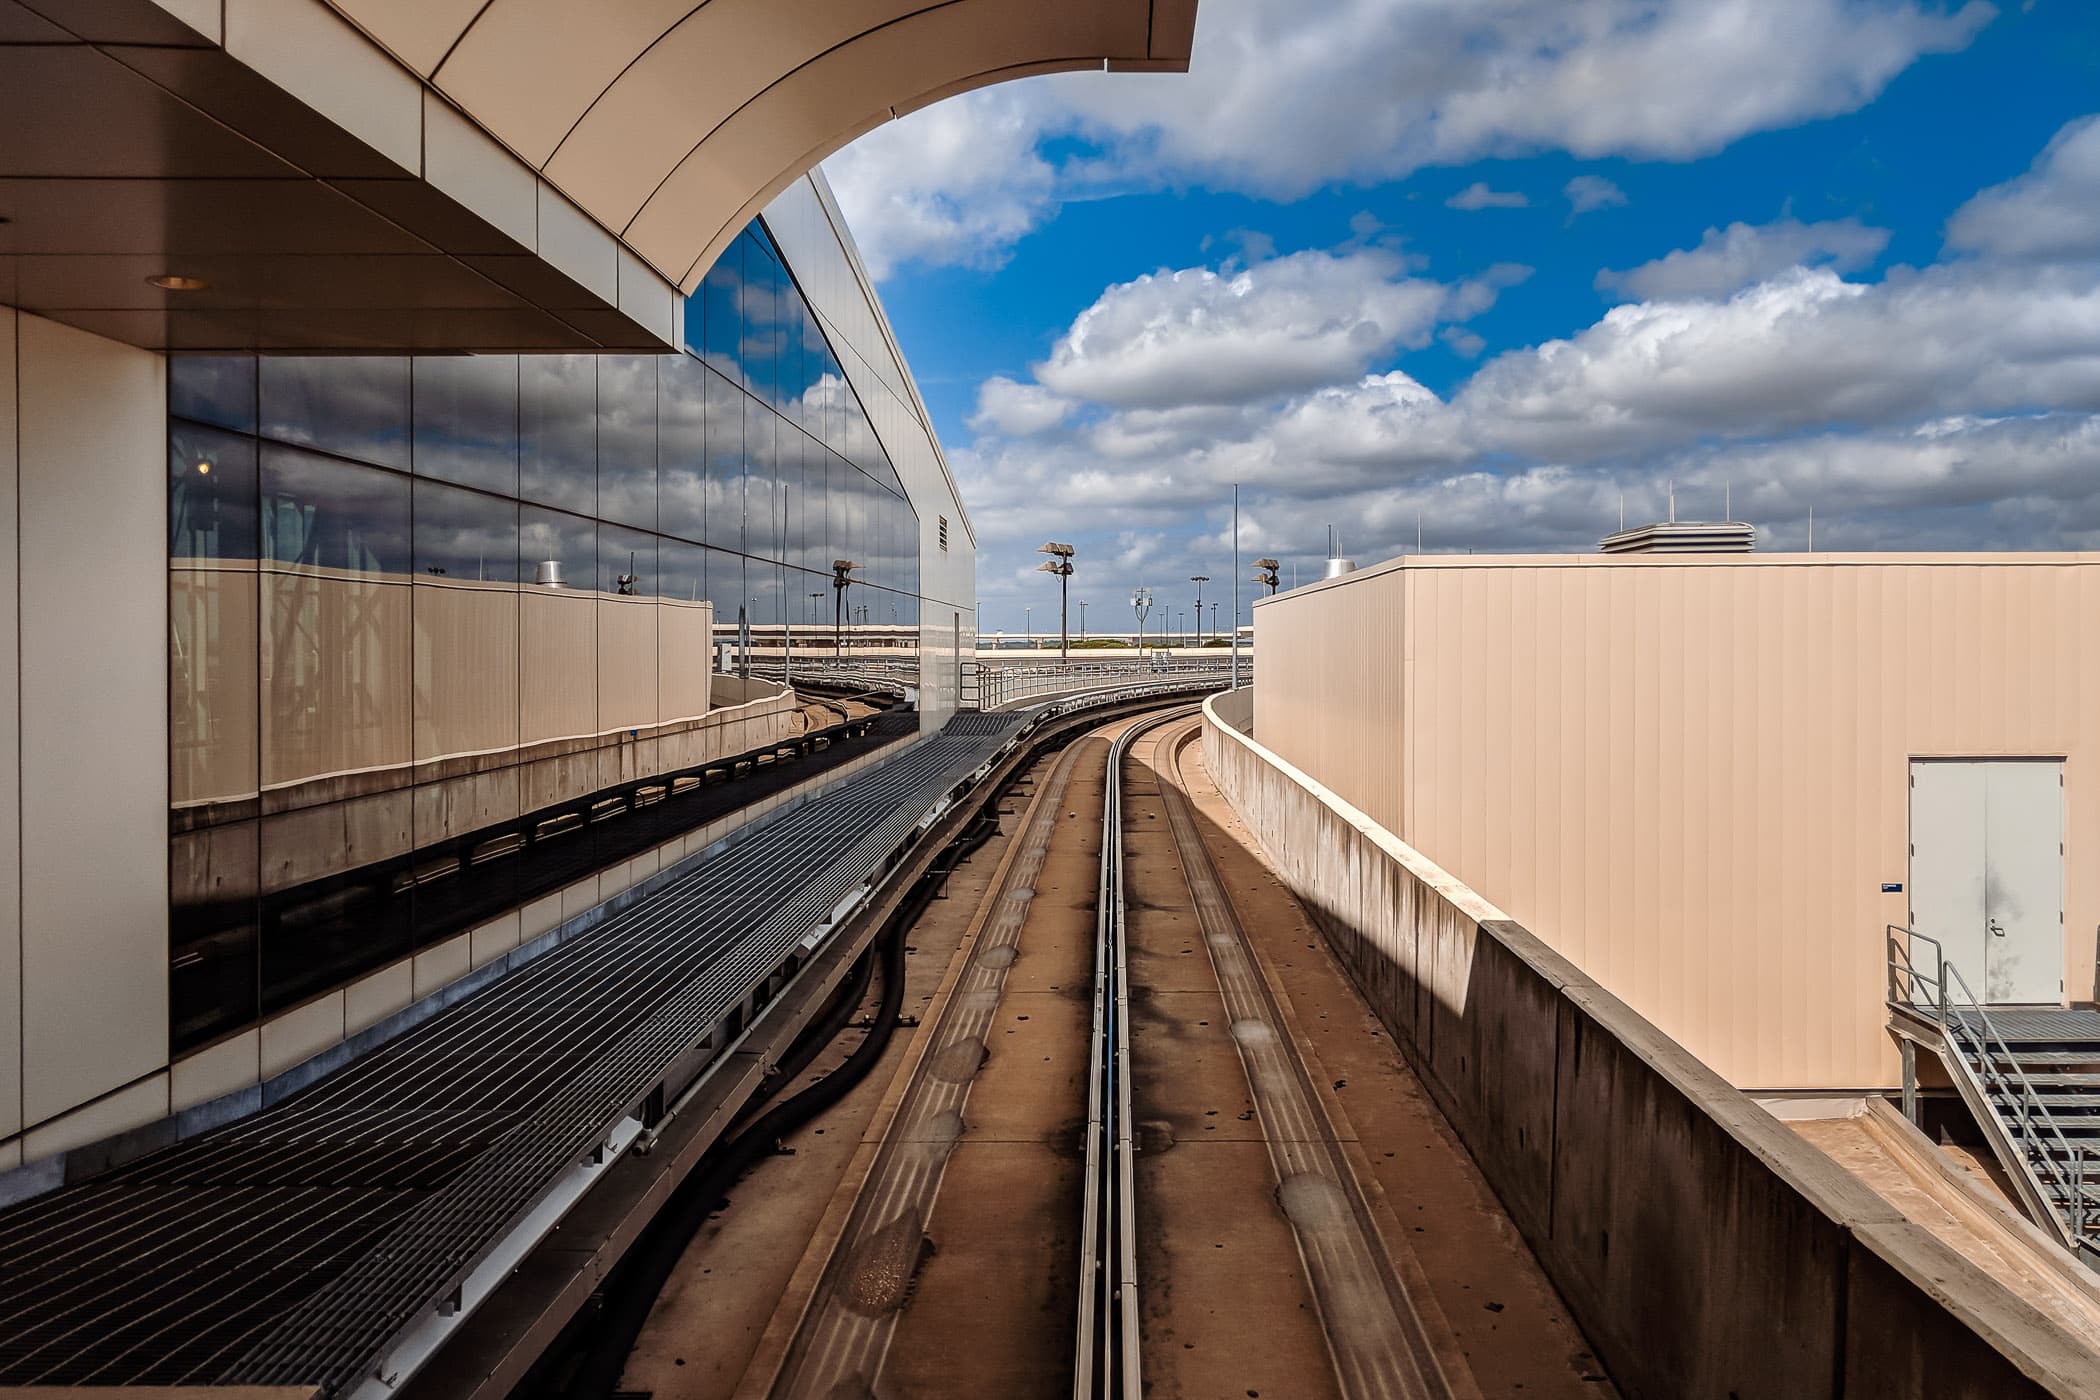 Tracks for the Skylink train lead away from a terminal at DFW International Airport, Texas.